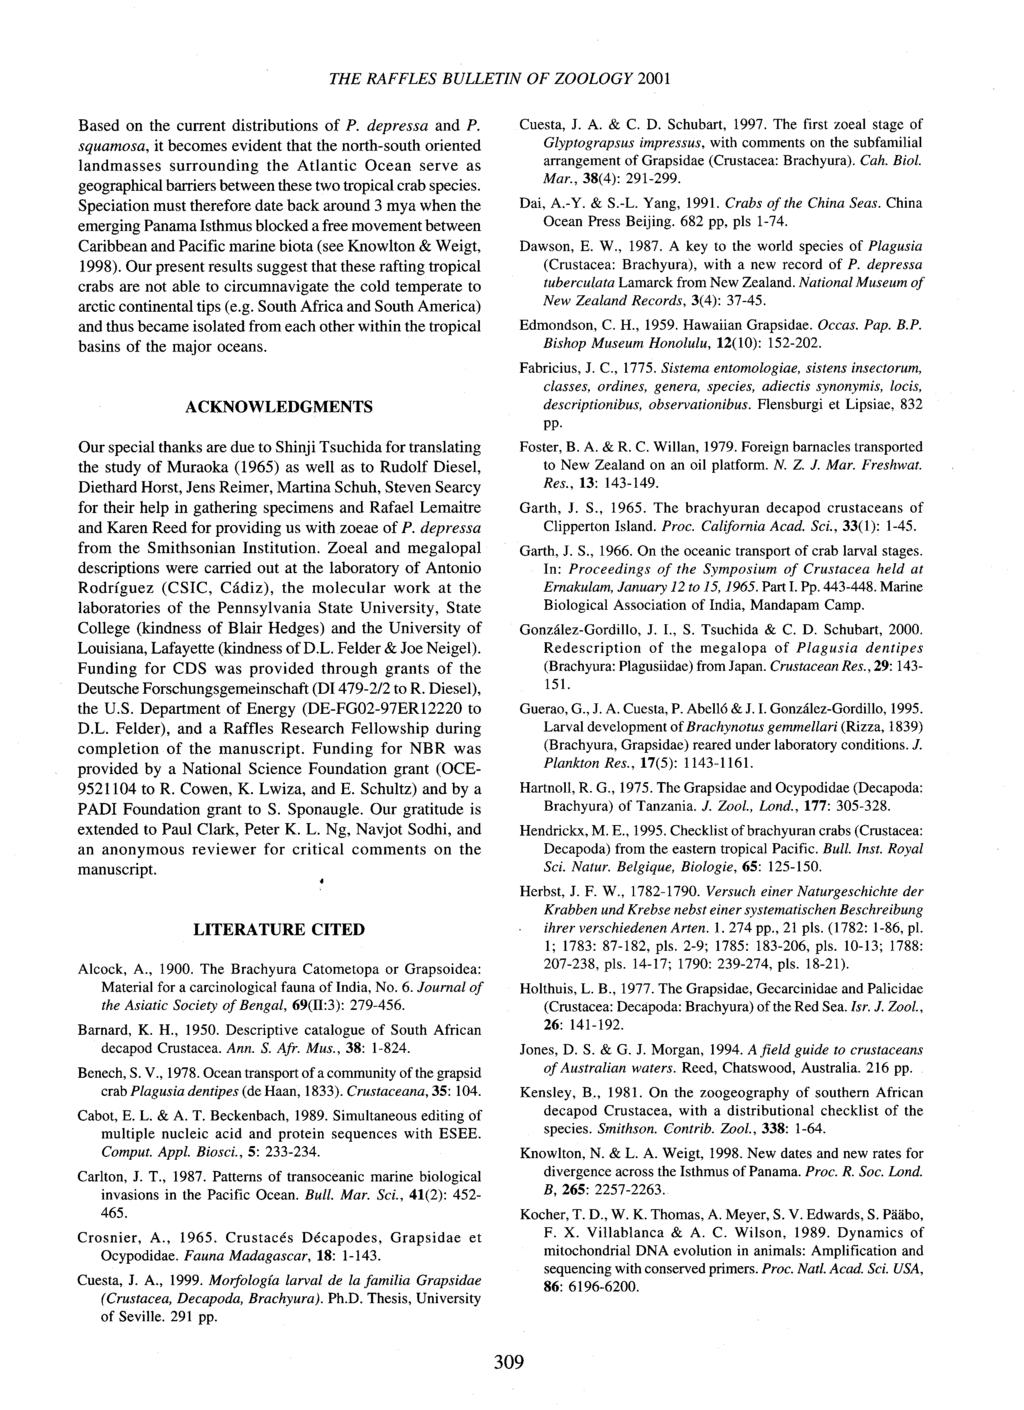 THE RAFFLES BULLETIN OF ZOOLOGY 2001 Based on the current distributions of P. depressa and P.